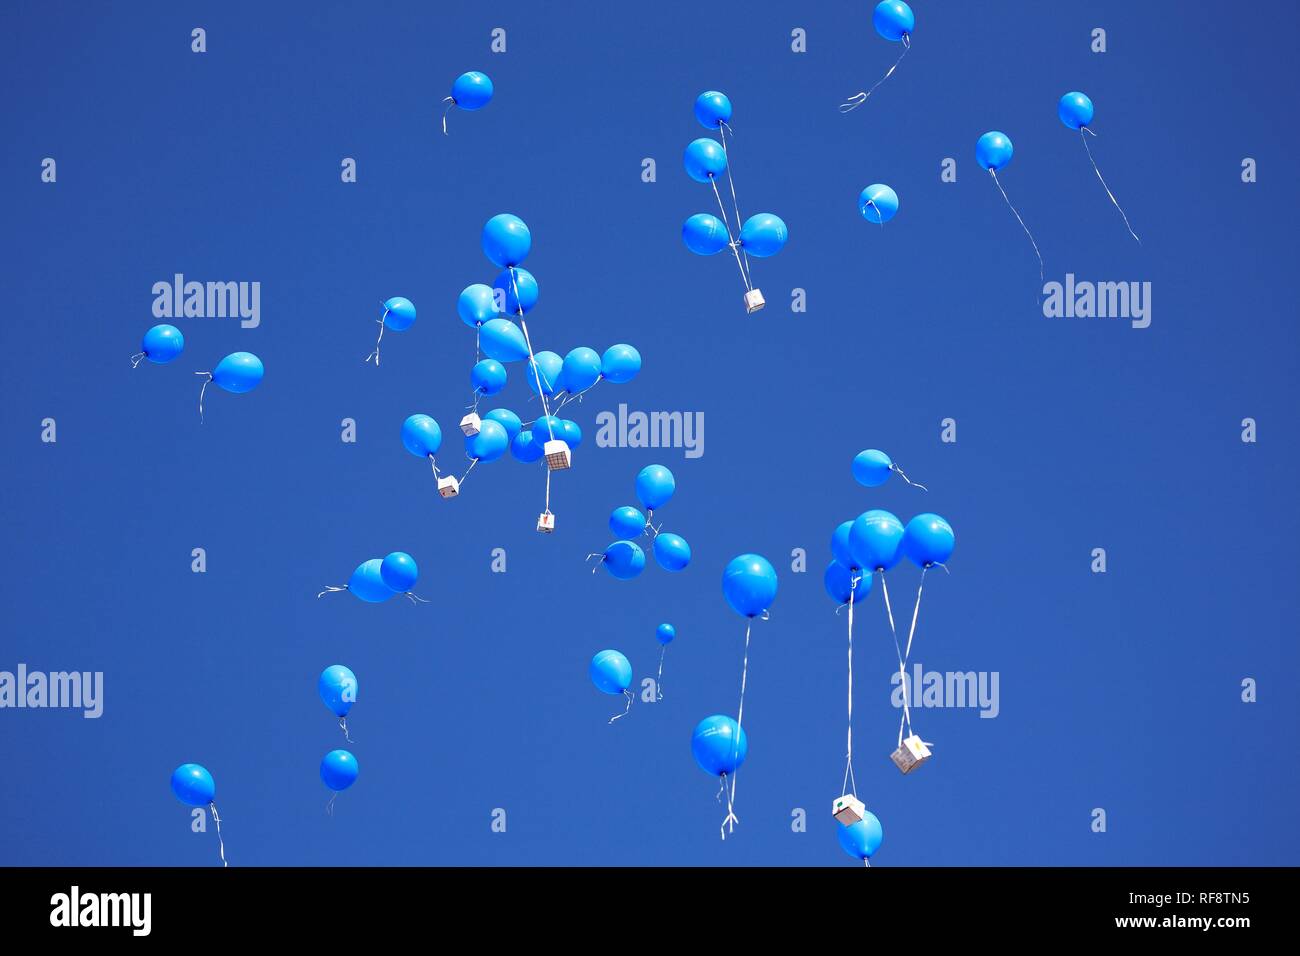 Lots of balloons in a blue sky Stock Photo